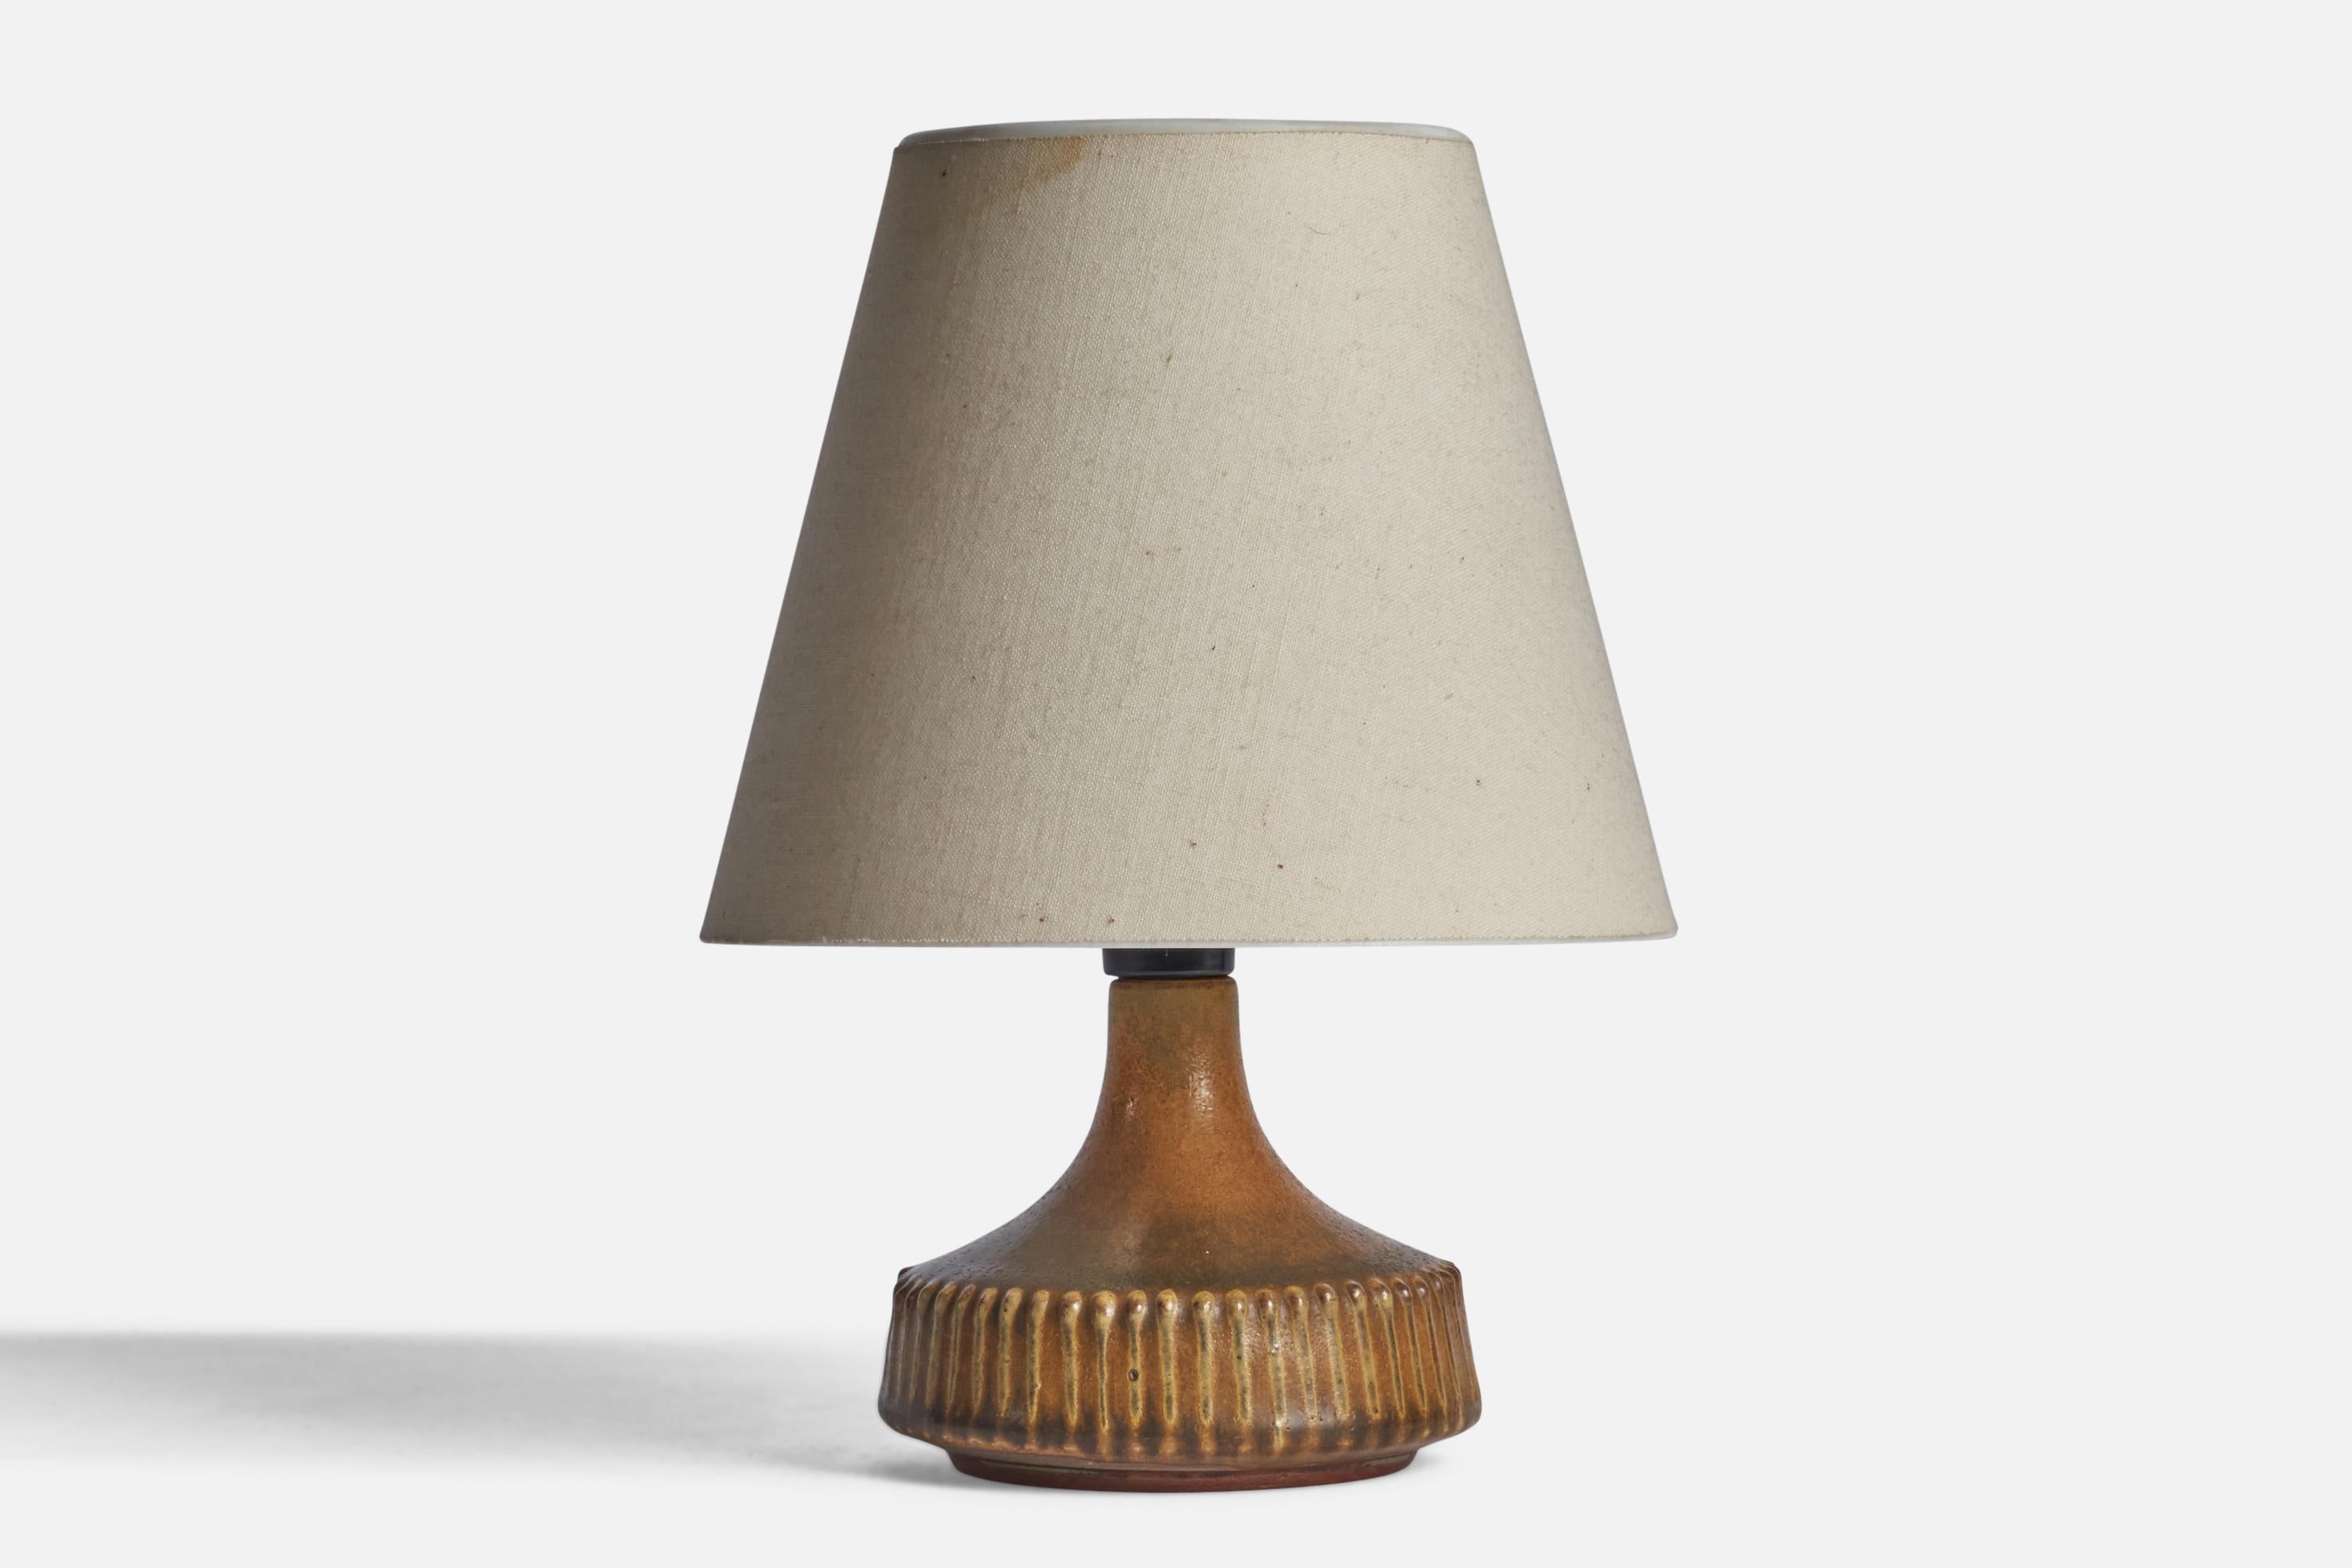 A small brown-glazed stoneware table lamp designed and produced by Rolf Palm, Mölle, Sweden, c. 1960s.

“PALM” stamp on bottom 

Dimensions of Lamp (inches): 5” H x 4” Diameter
Dimensions of Shade (inches): 3.5” Top Diameter x 6.5” Bottom Diameter x